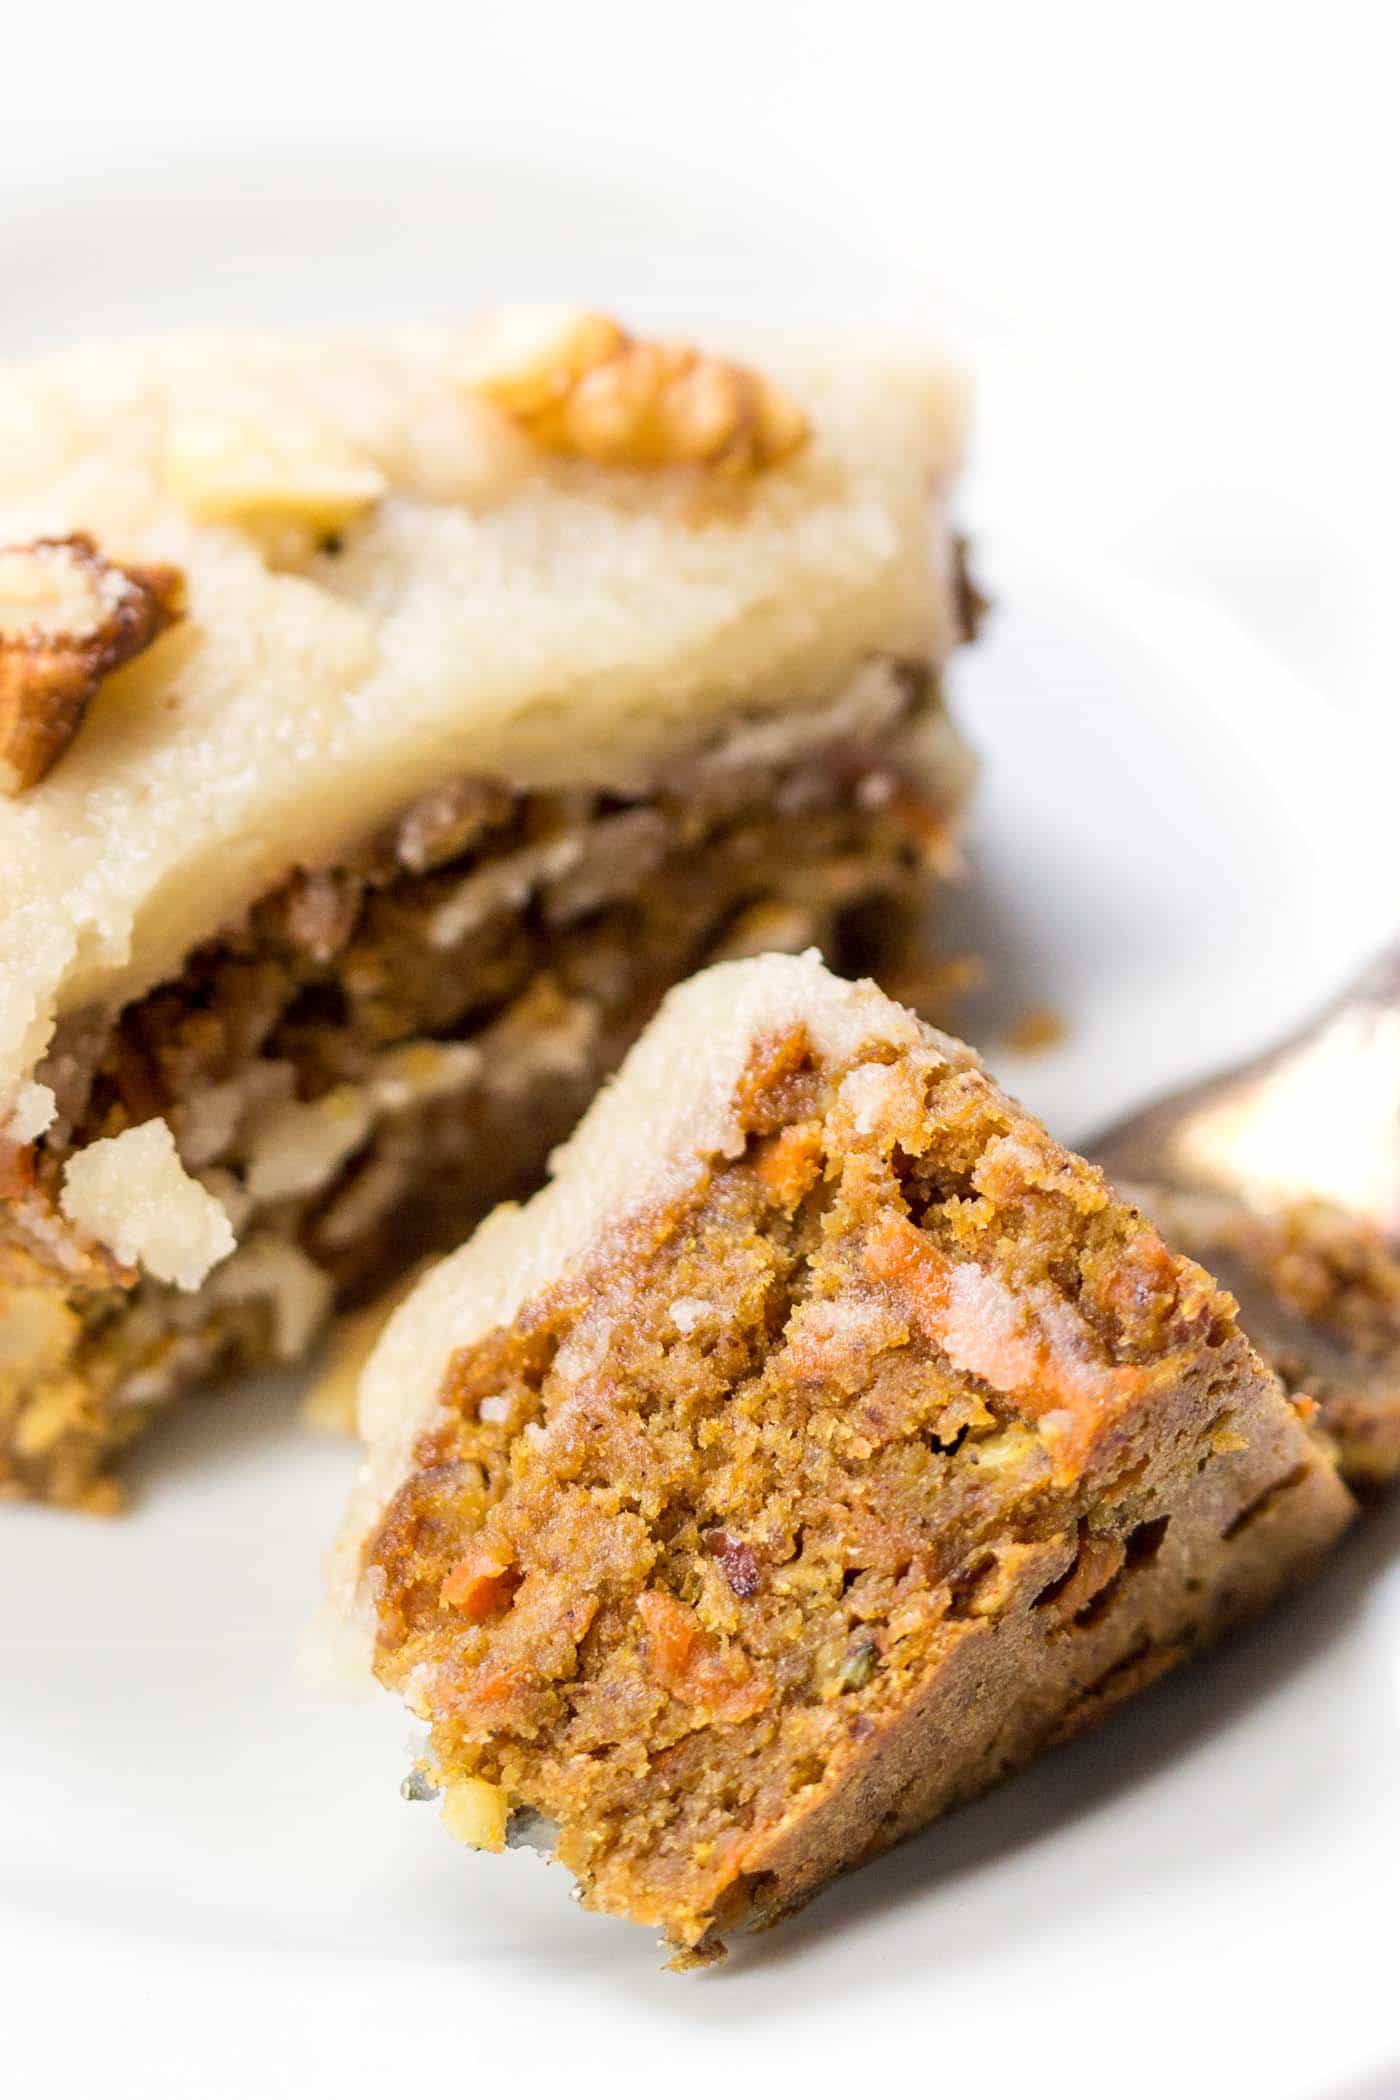 This vegan carrot cake has the most amazing texture! And you'll never guess what's inside...clean, healthy and simple! [gluten-free]